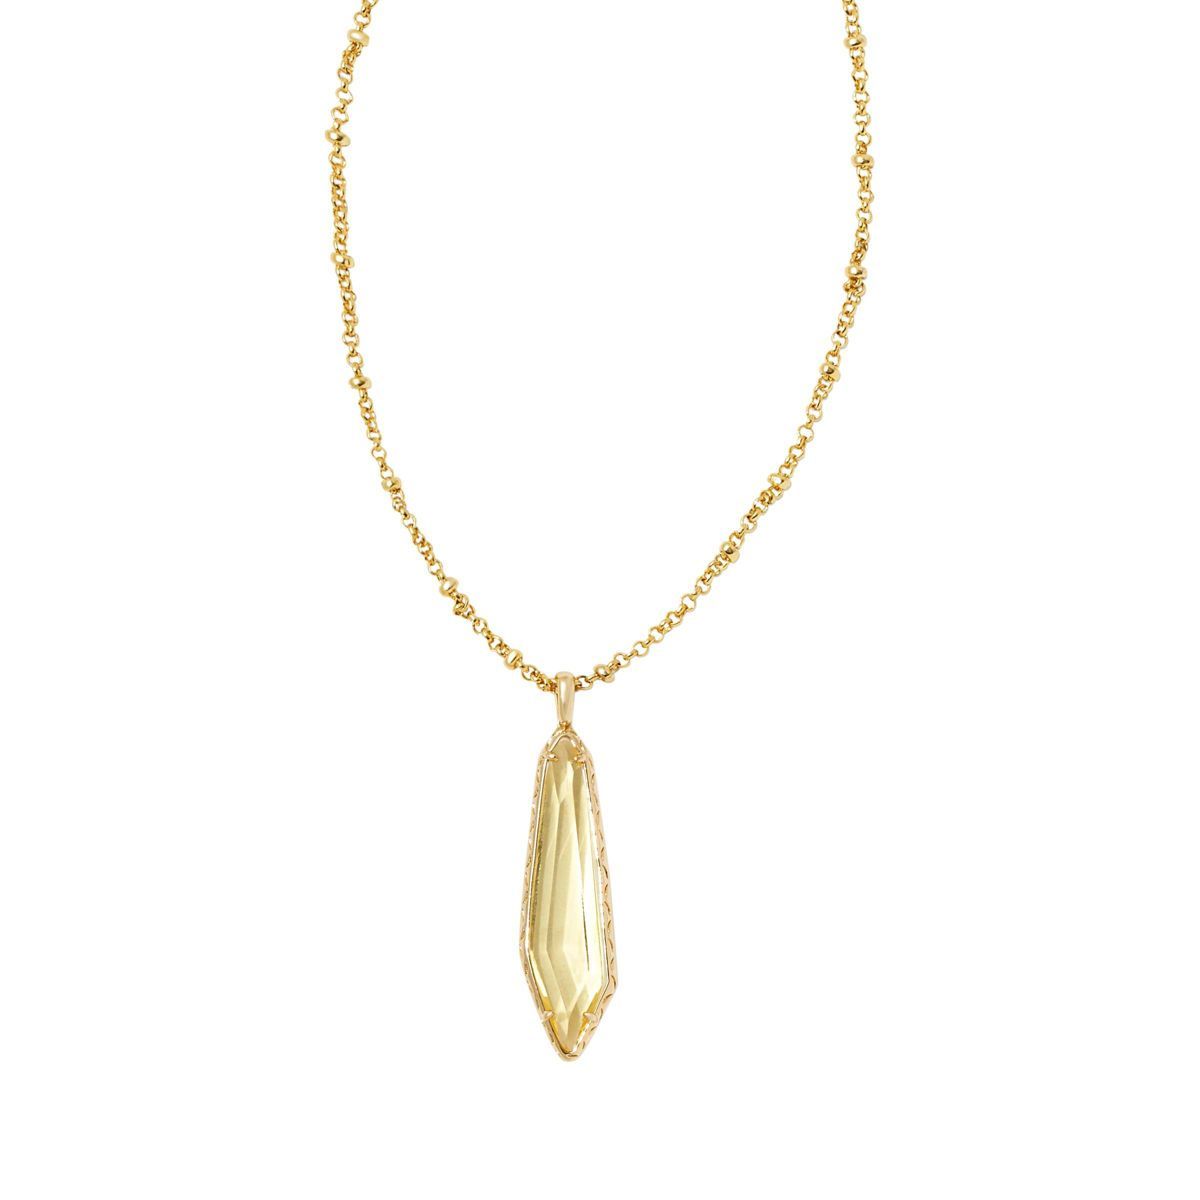 Kendra Scott Alice 14K Gold Over Brass Long Pendant Necklace - Pale Yellow | Target